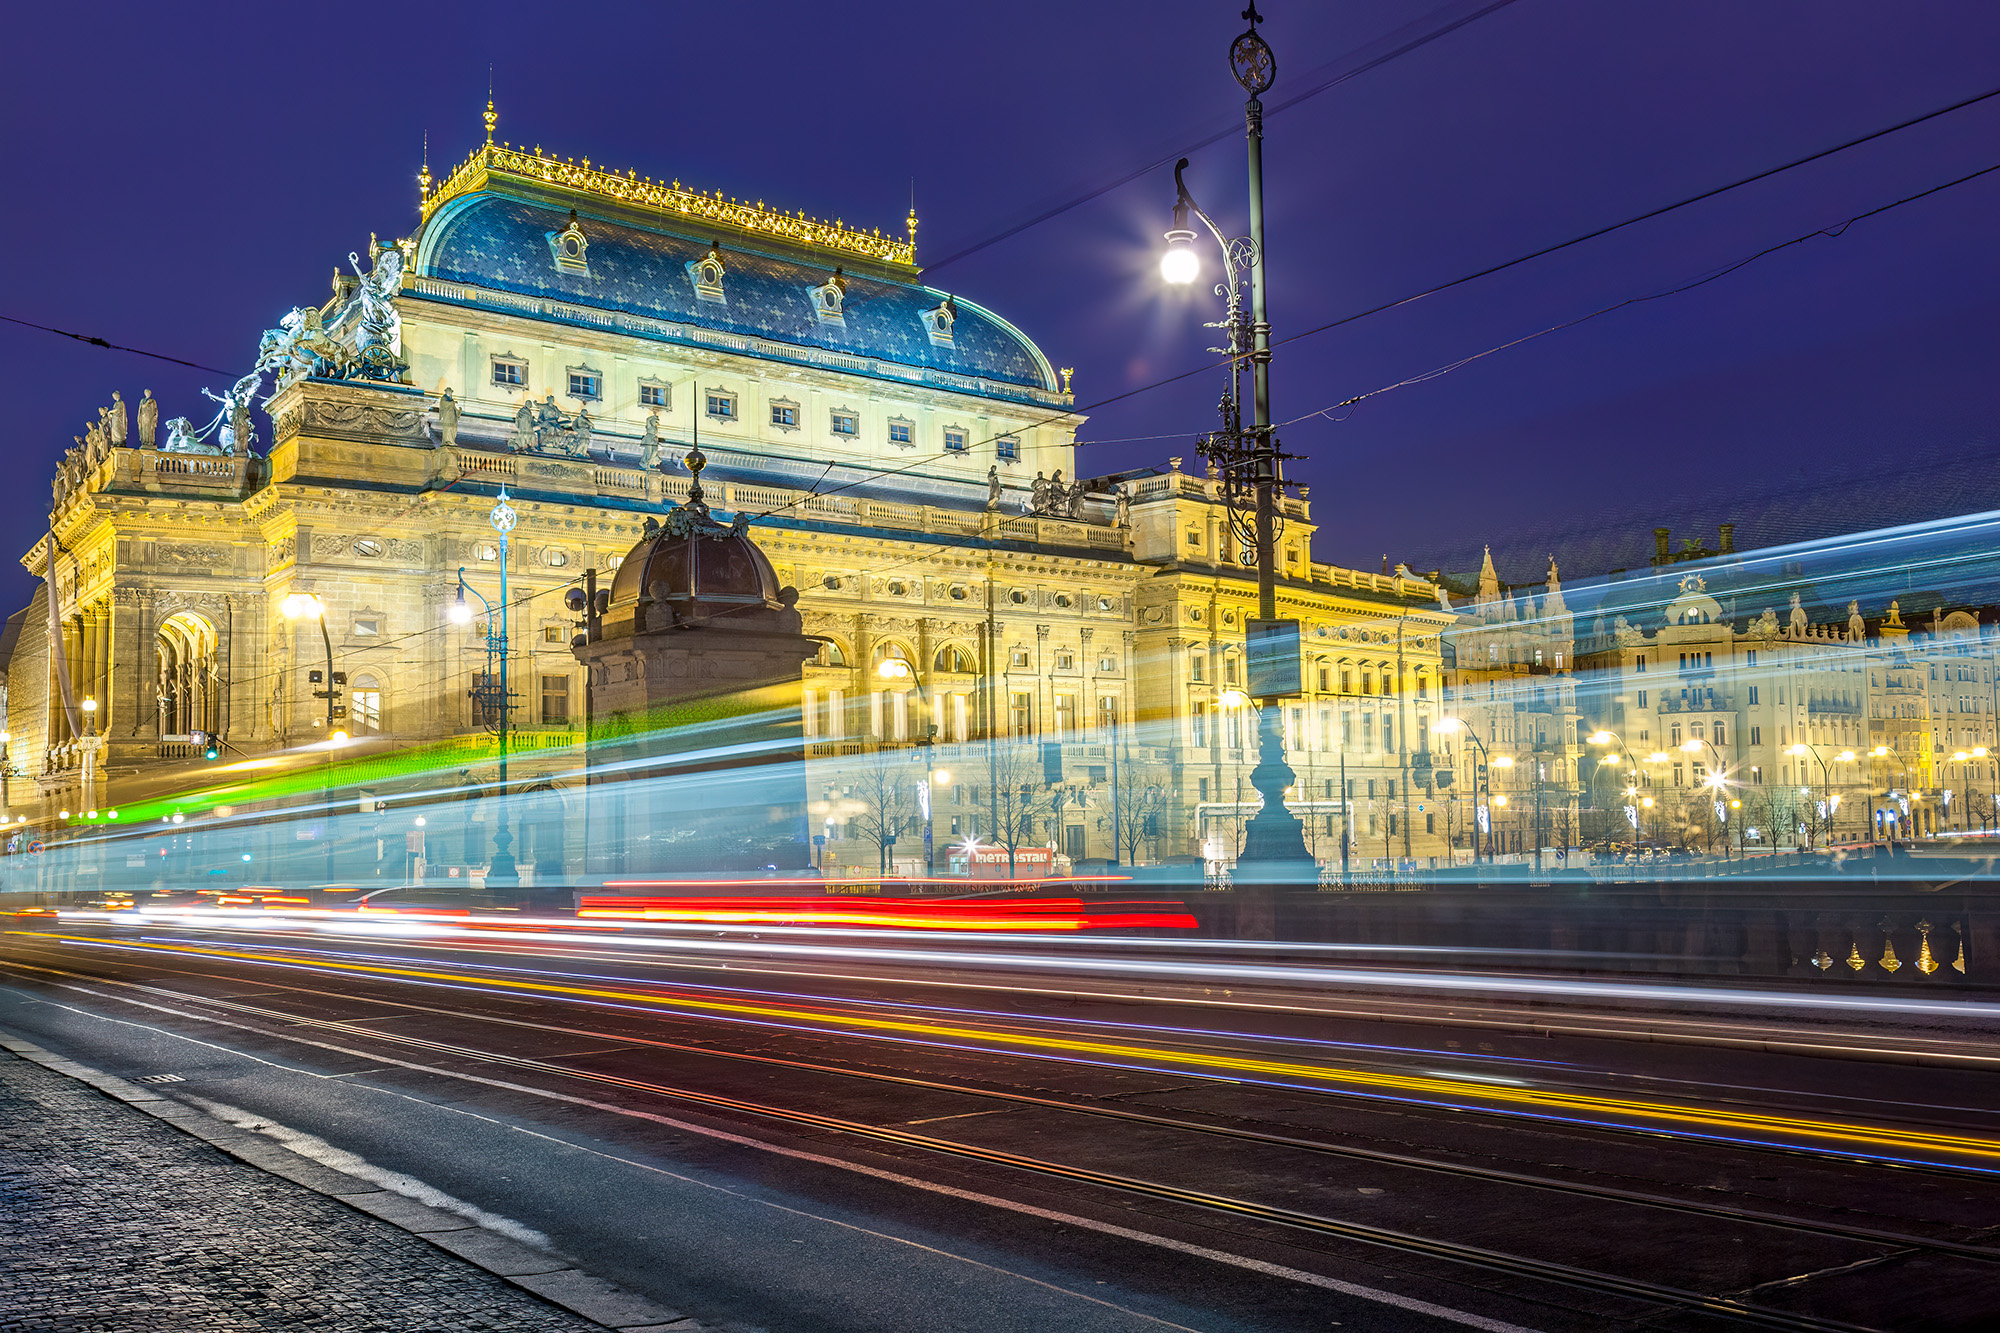 Set against the enchanting backdrop of Prague's National Theatre, this image captures the grandeur of the cultural institution...